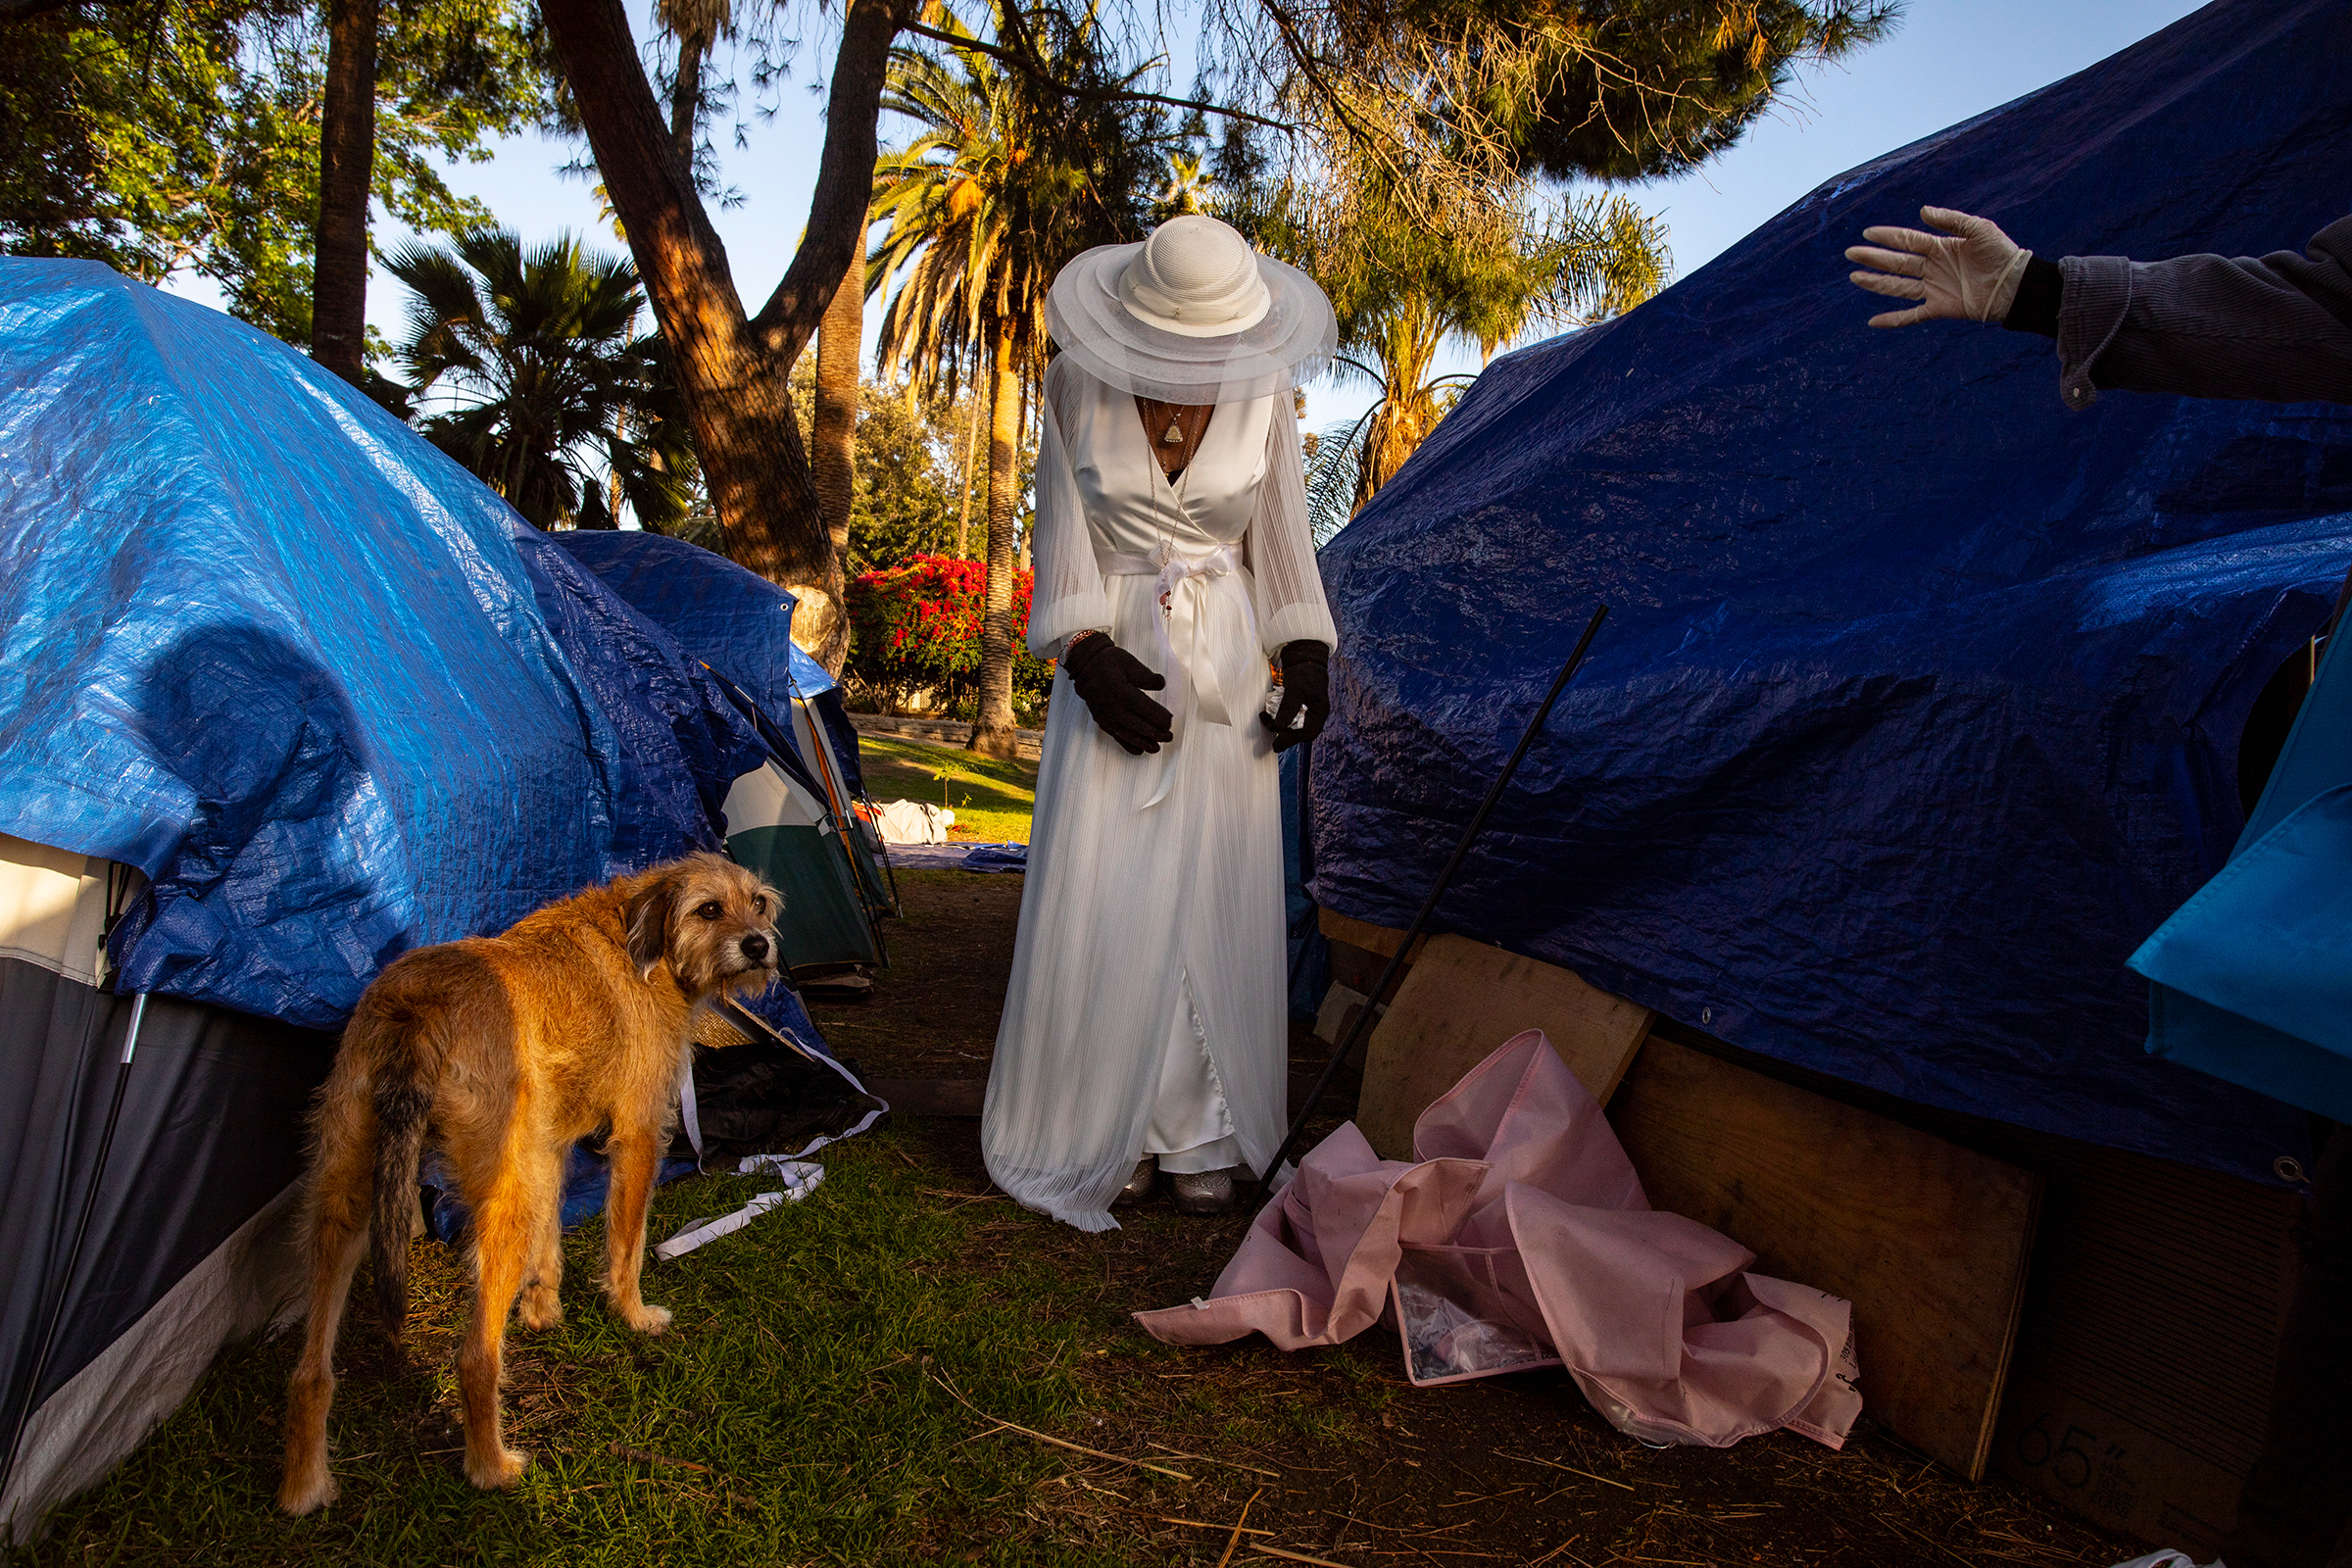 Valerie Zeller, 52, cries during her first-ever wedding dress fitting by the side of her tent in Echo Park Lake, in Los Angeles, on March 13, 2021. Heather Yoo, a seamstress with Royal Brides, donated a dress for Zeller and assisted with a fitting a week before the wedding to be sure the alterations would be ready for her special day. Five days after the March 20 wedding, the unhoused community of Echo Park Lake was evicted.